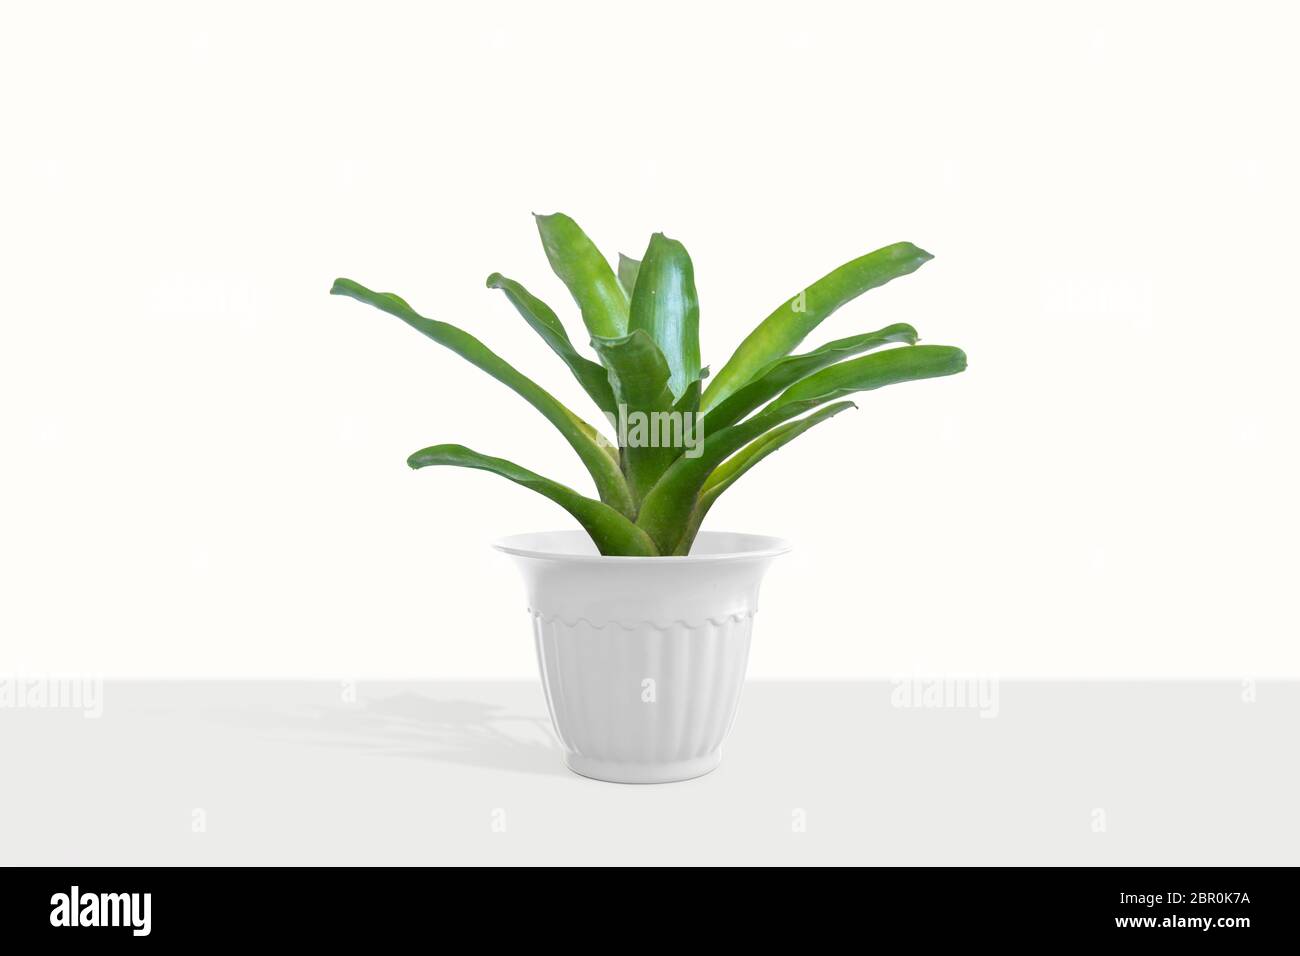 Green Bromeliad isolated on white background. Stock Photo